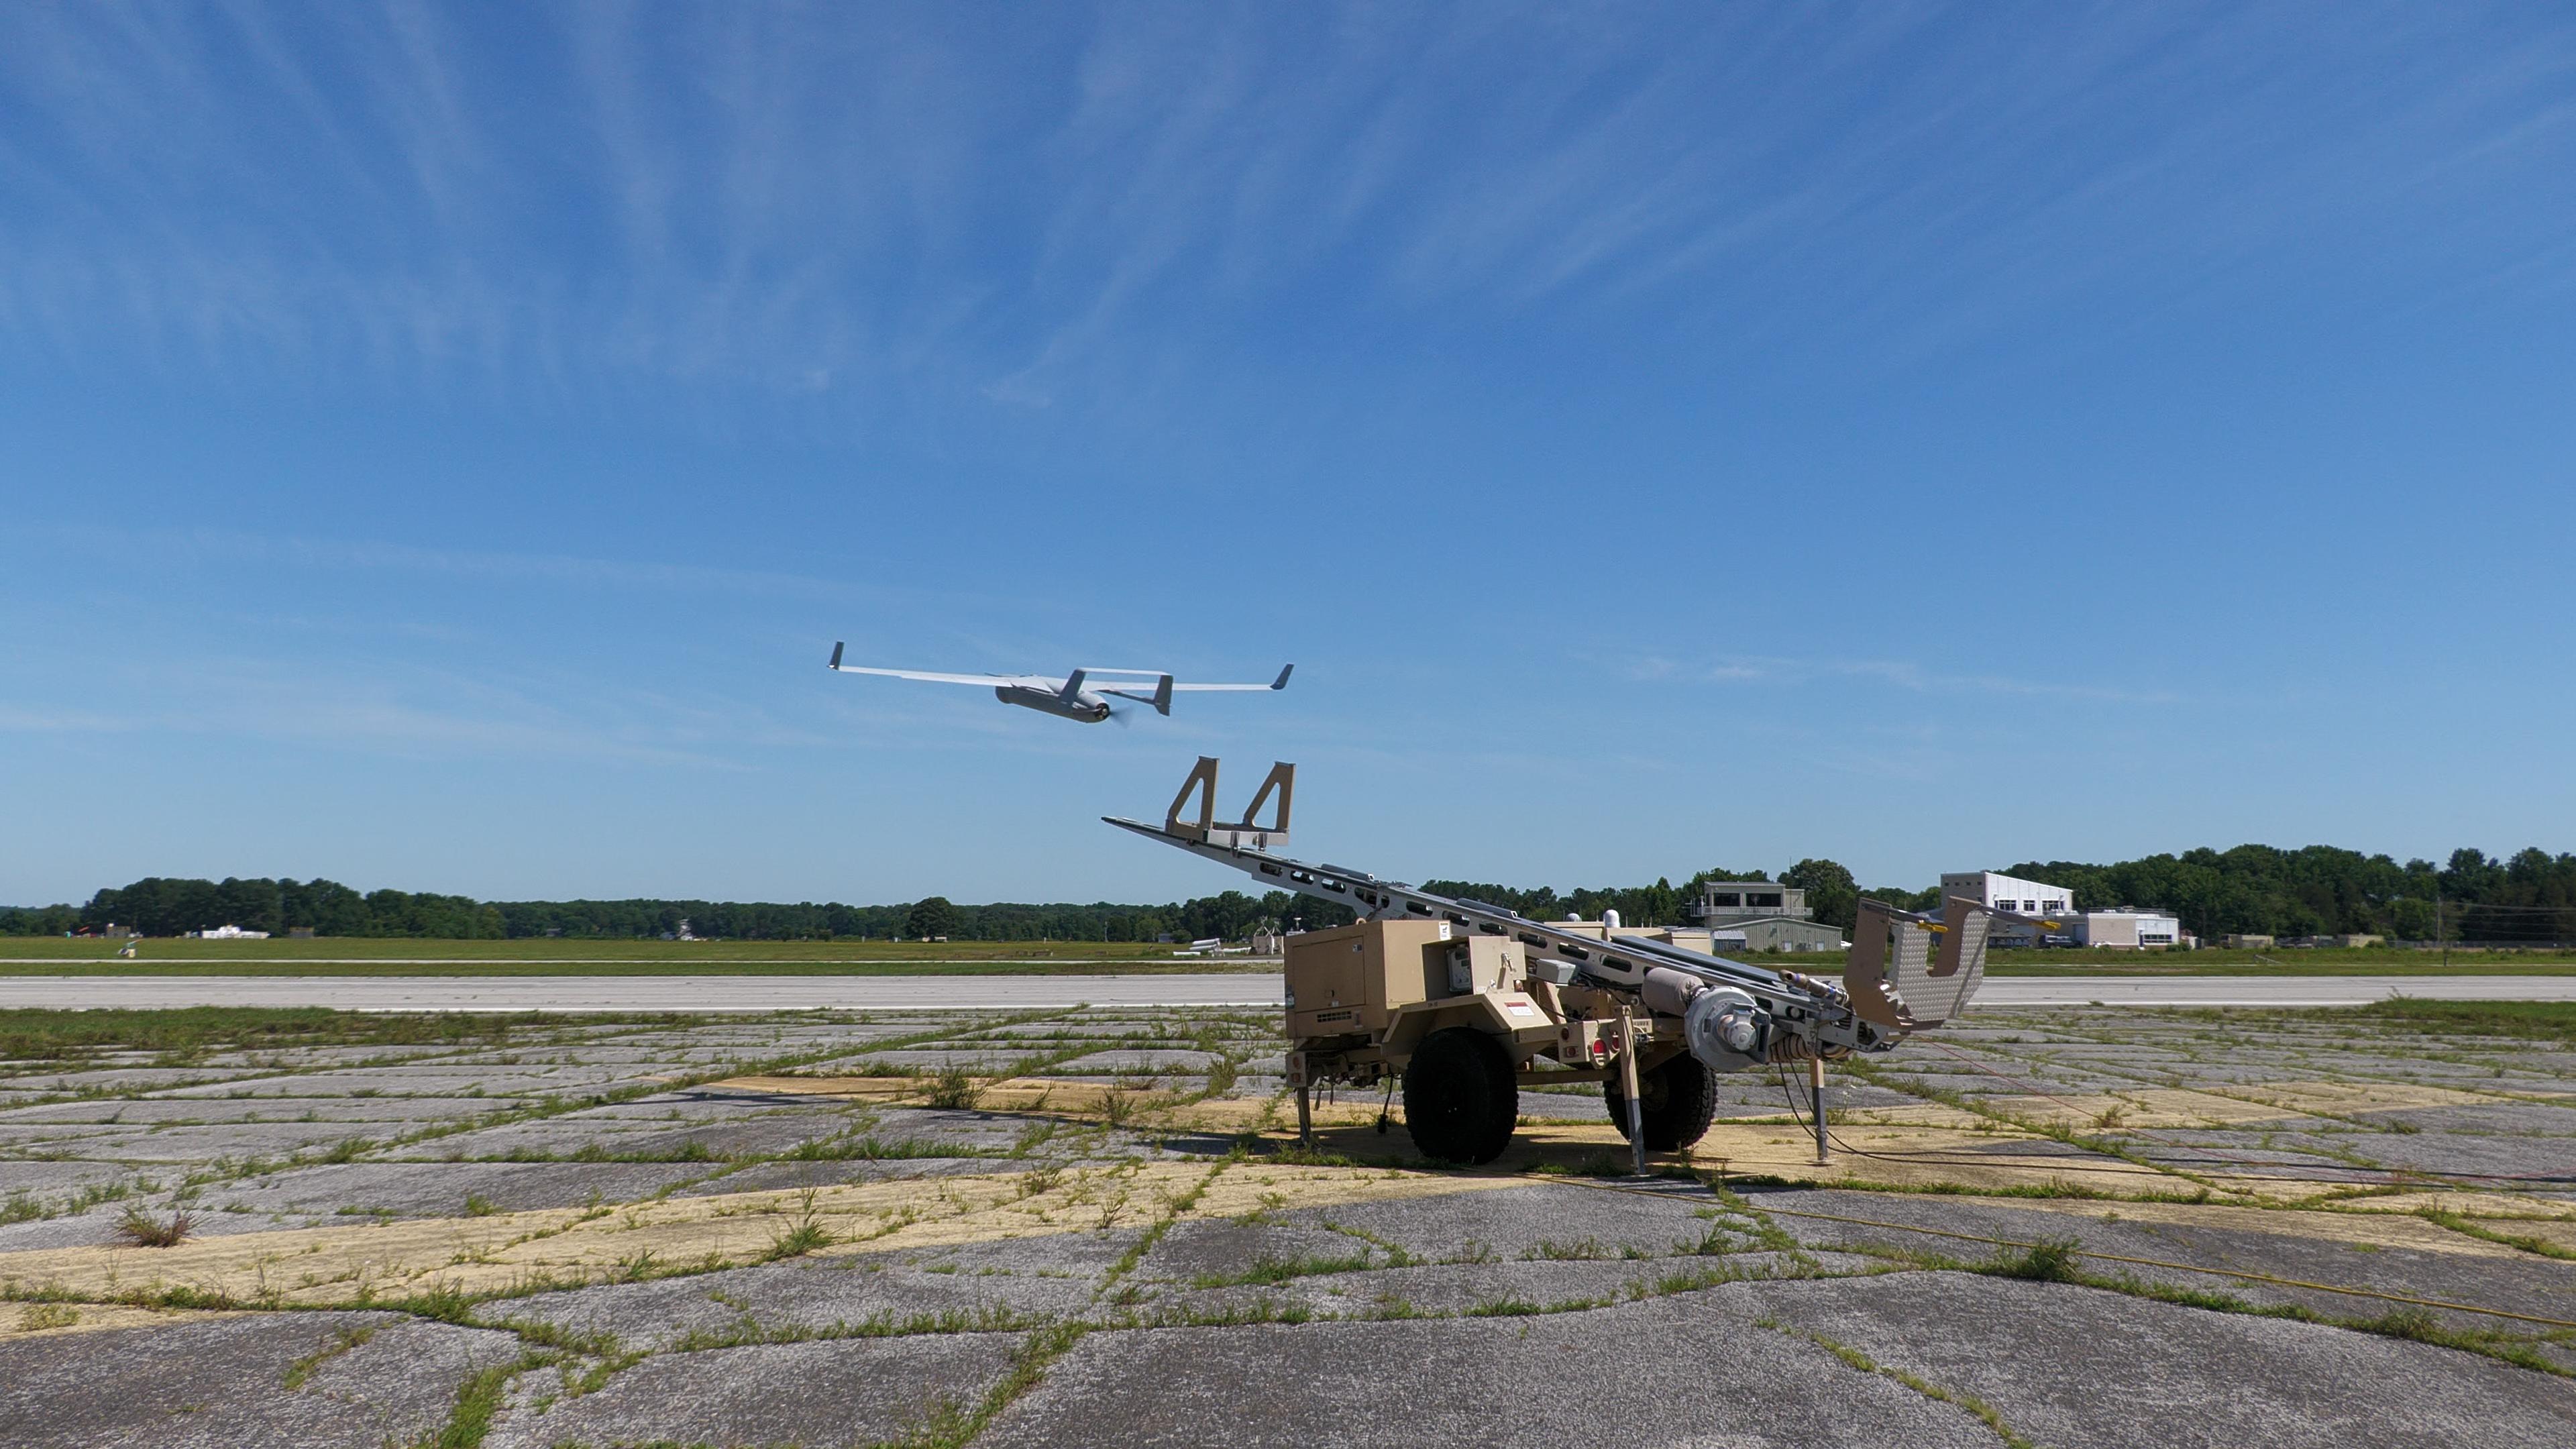 An RQ-21 Blackjack fixed-wing unmanned aerial system launches into blue skies over an airfield.